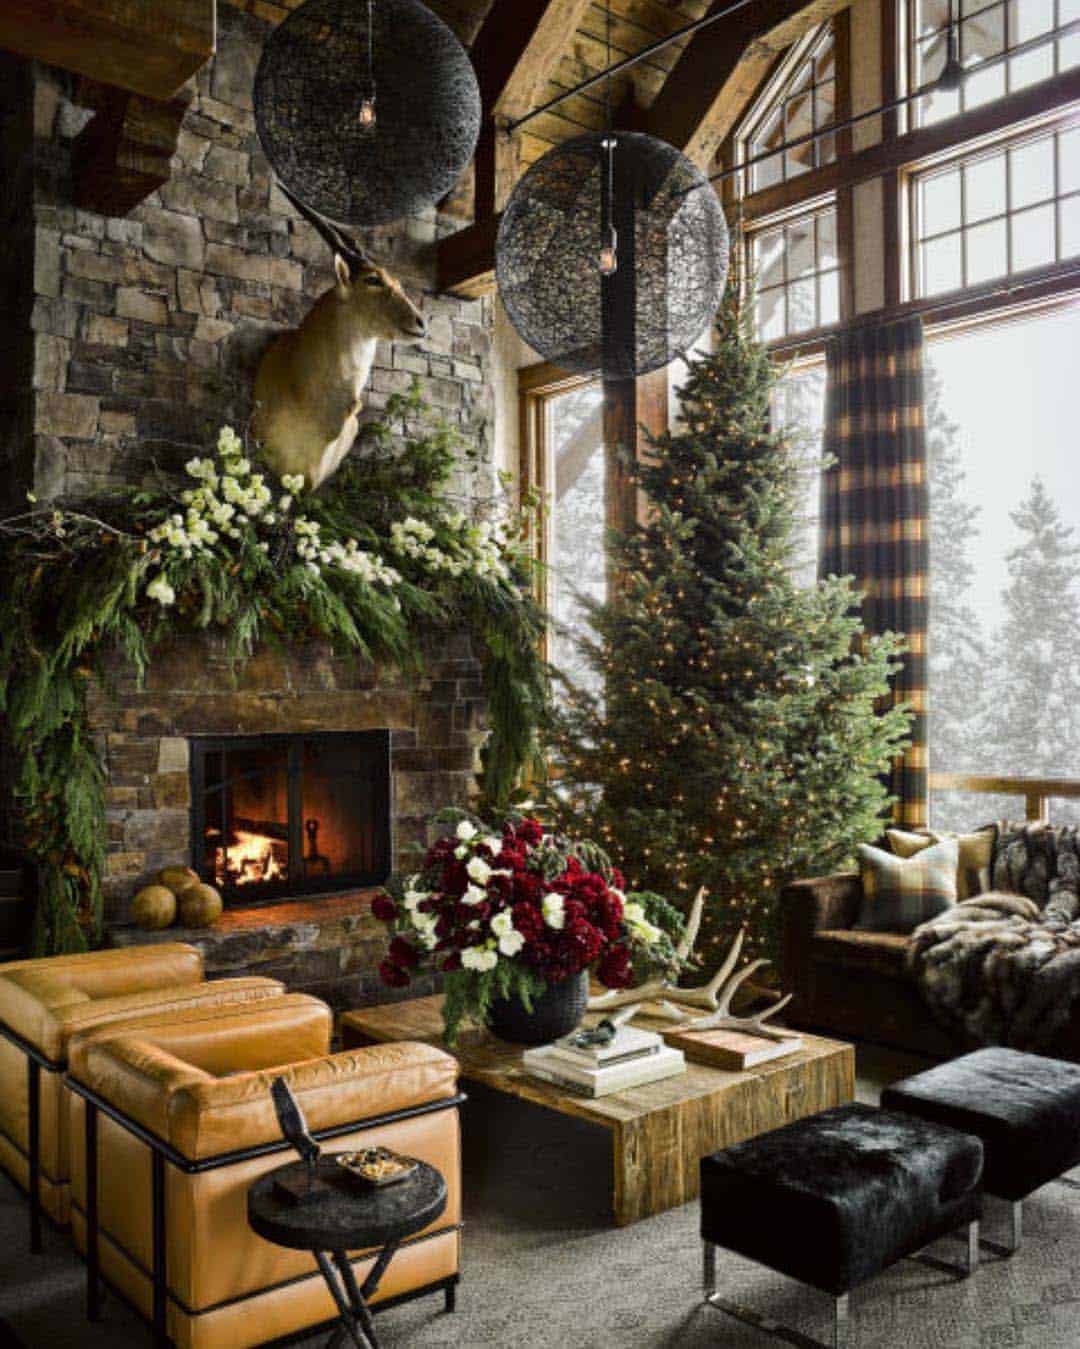 Montana guest retreat gets a fabulous makeover for the holidays